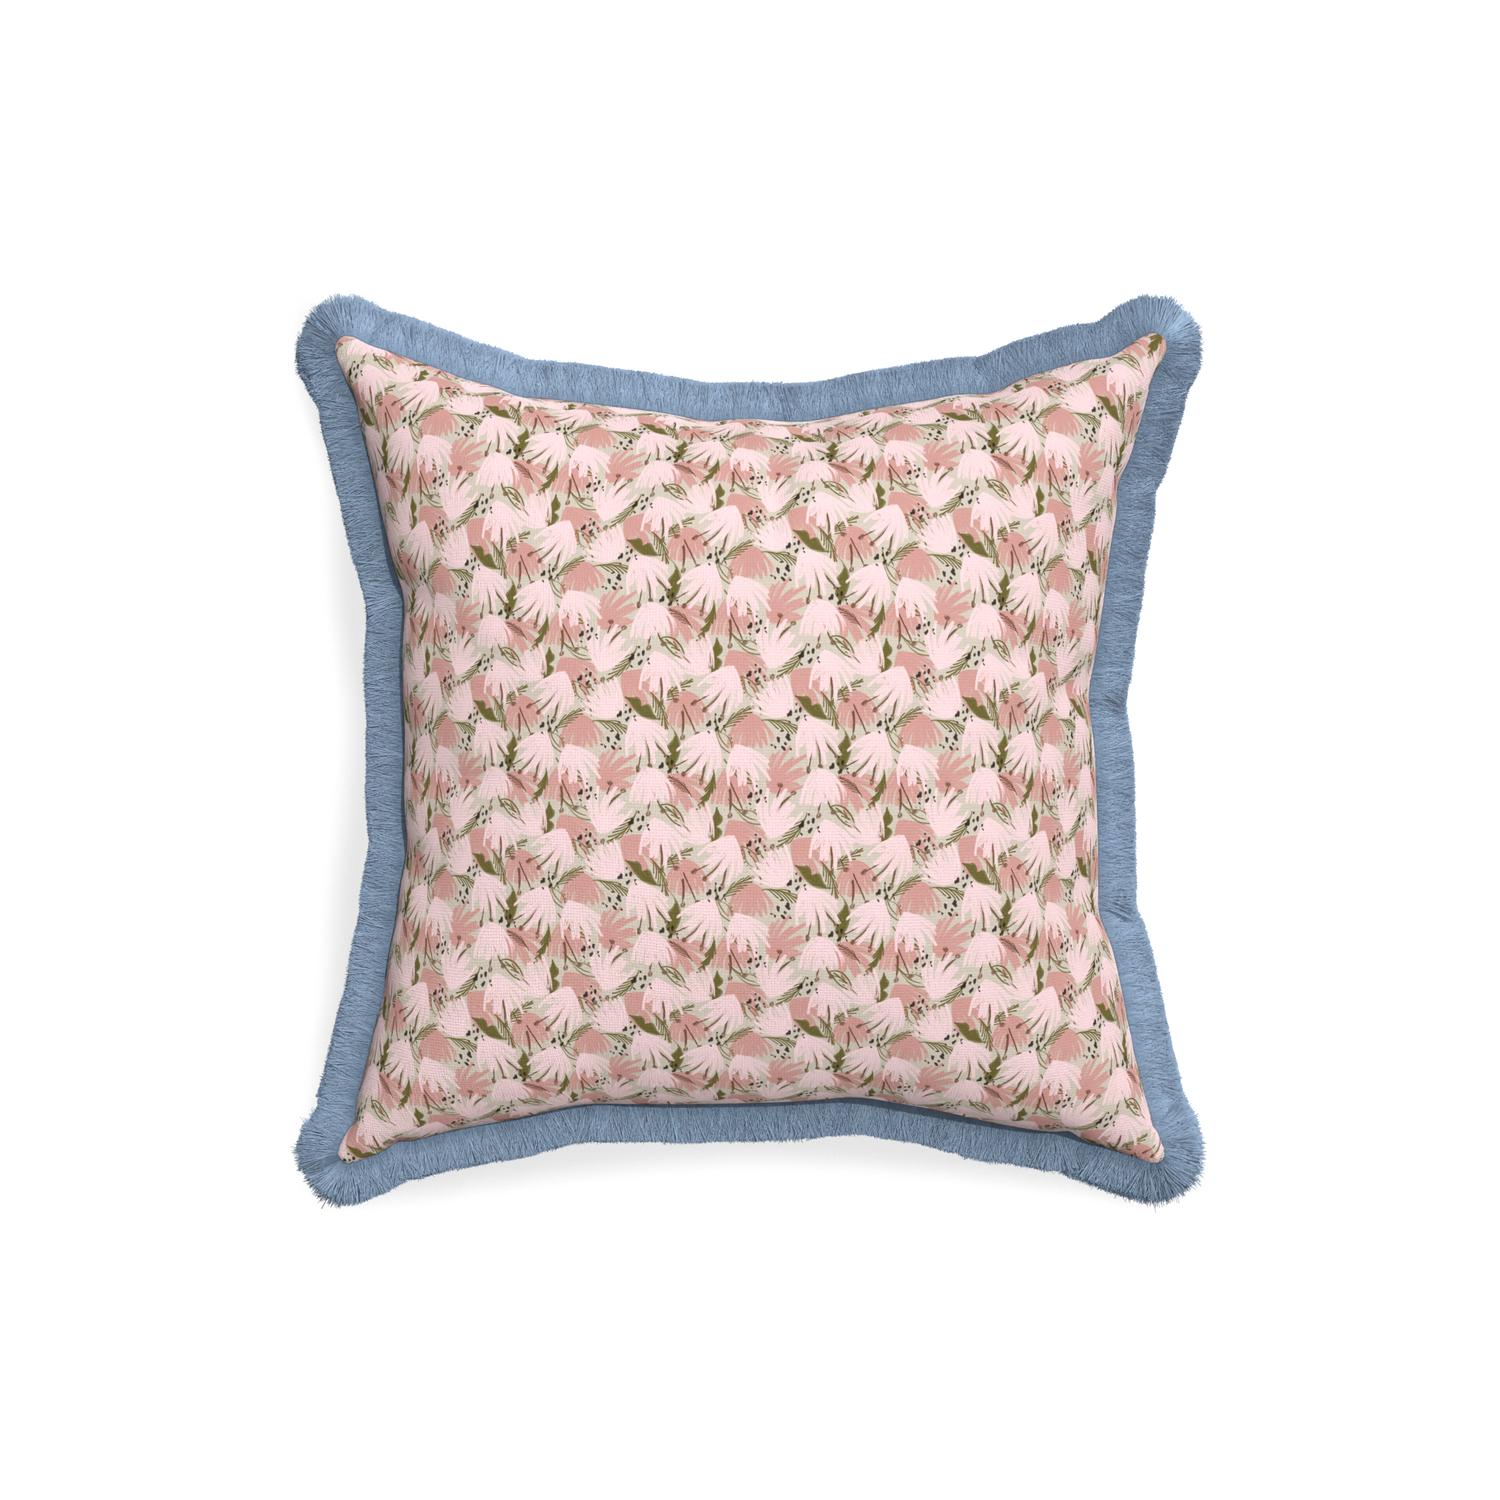 18-square eden pink custom pillow with sky fringe on white background